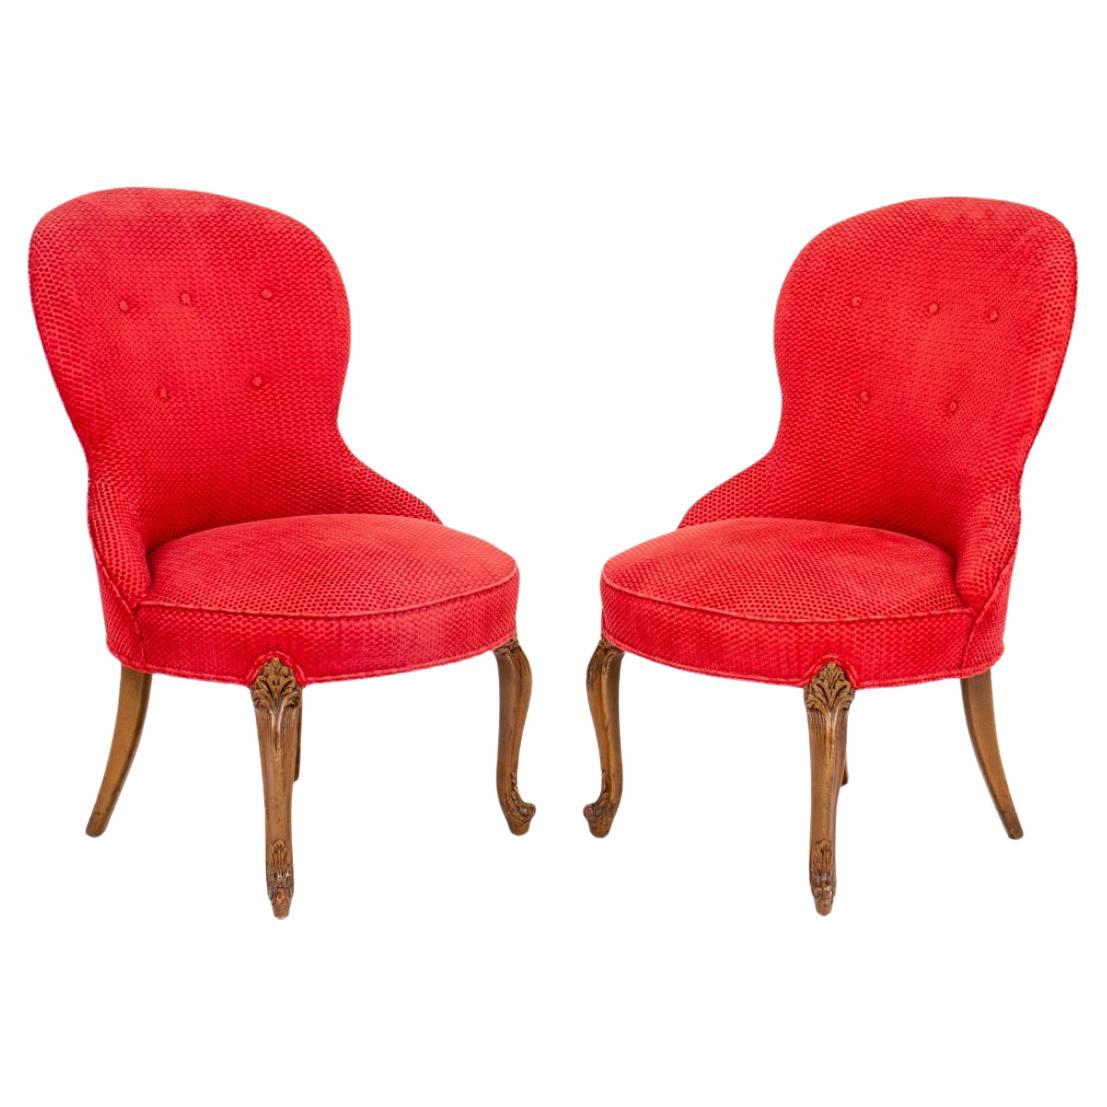 Victorian Manner Slipper Chairs, Pair For Sale